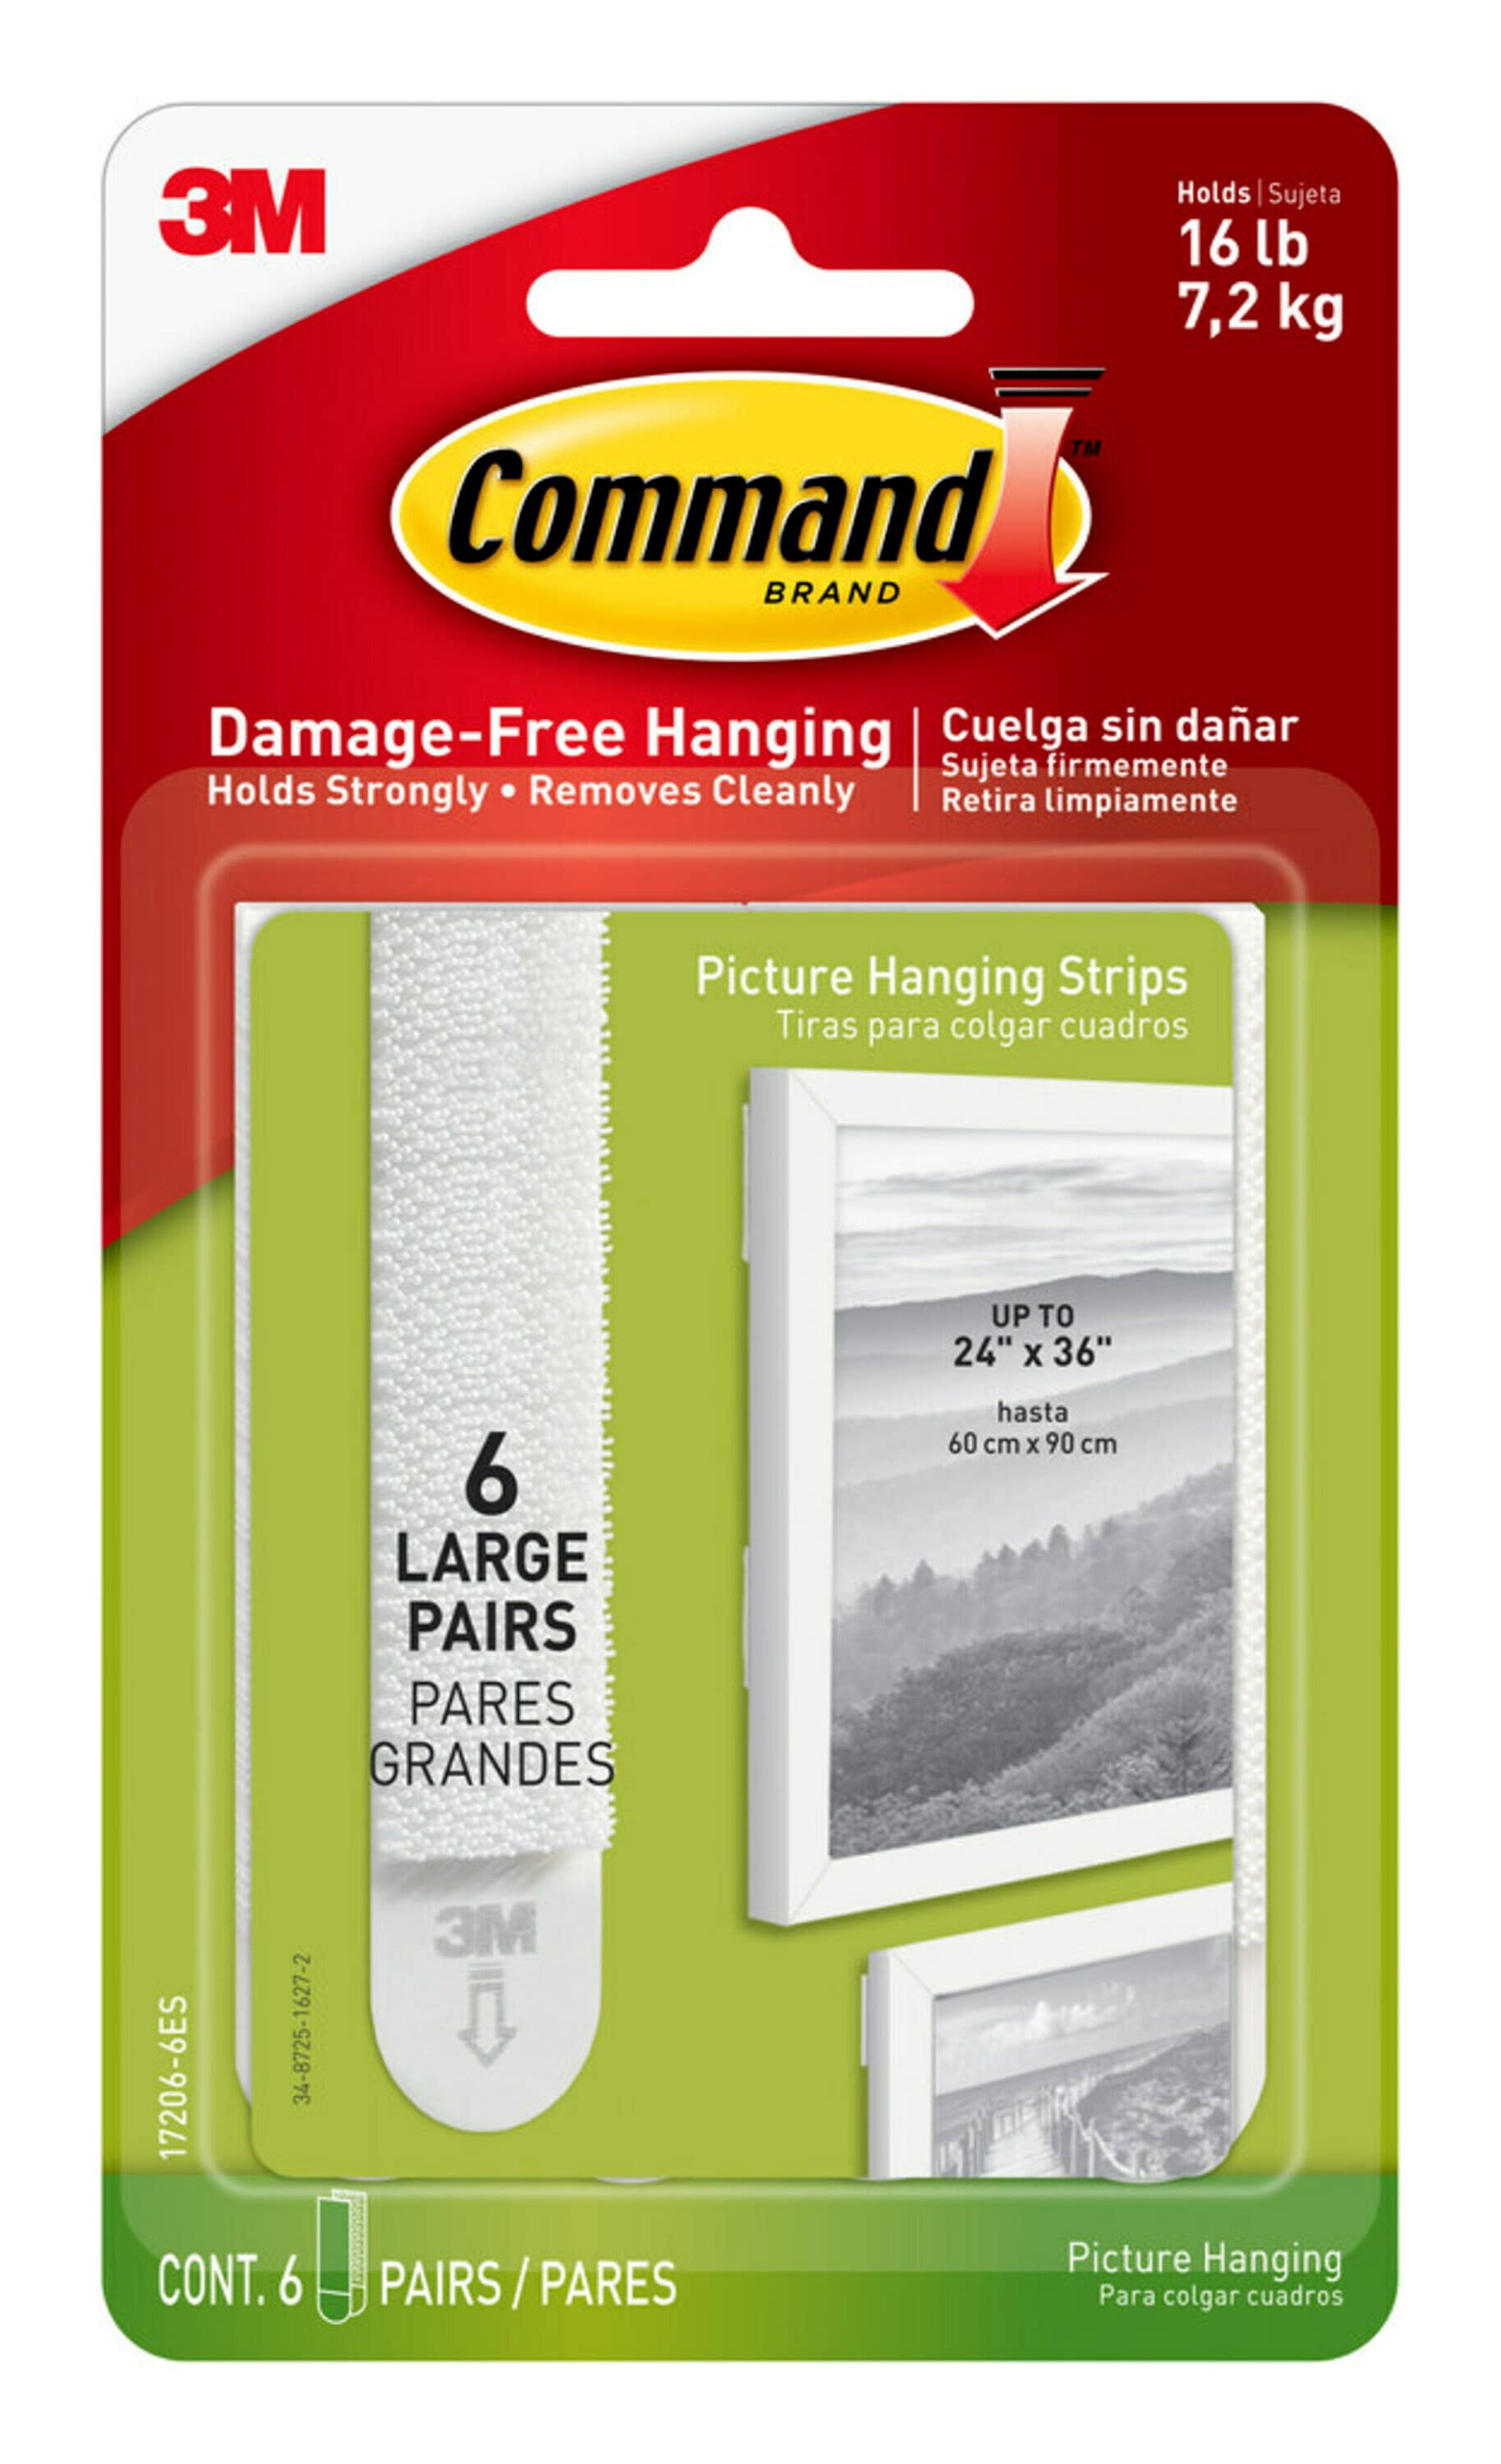 3M Command Strips Self Adhesive Damage Free Wall Hanging Picture Frames SALE!! 